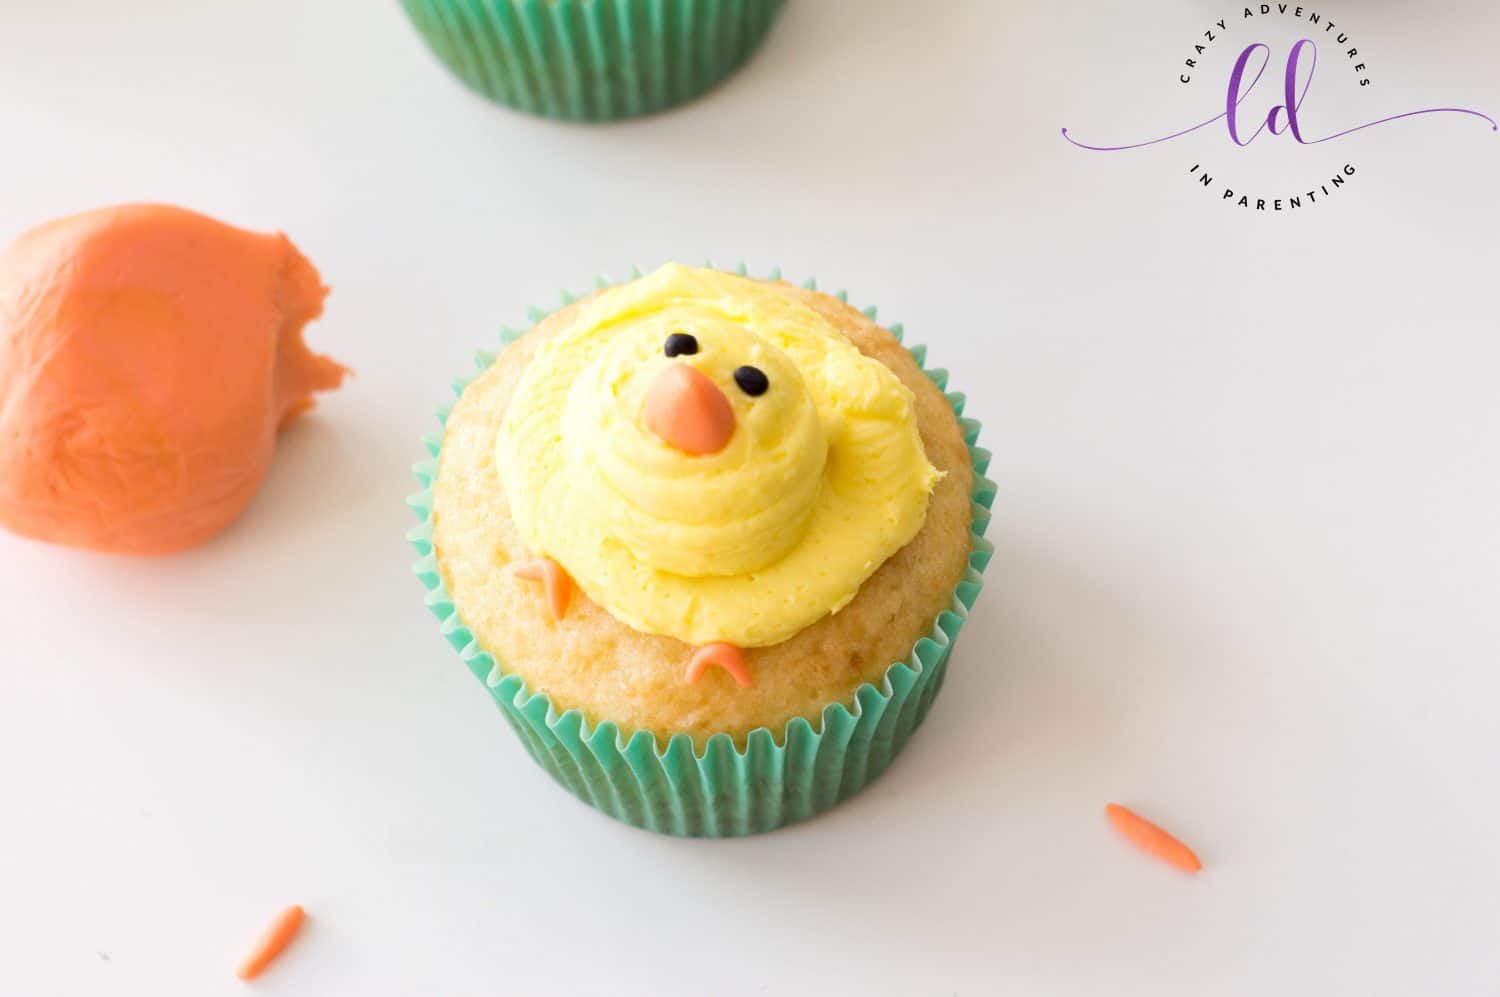 Assembled Chick Cupcakes